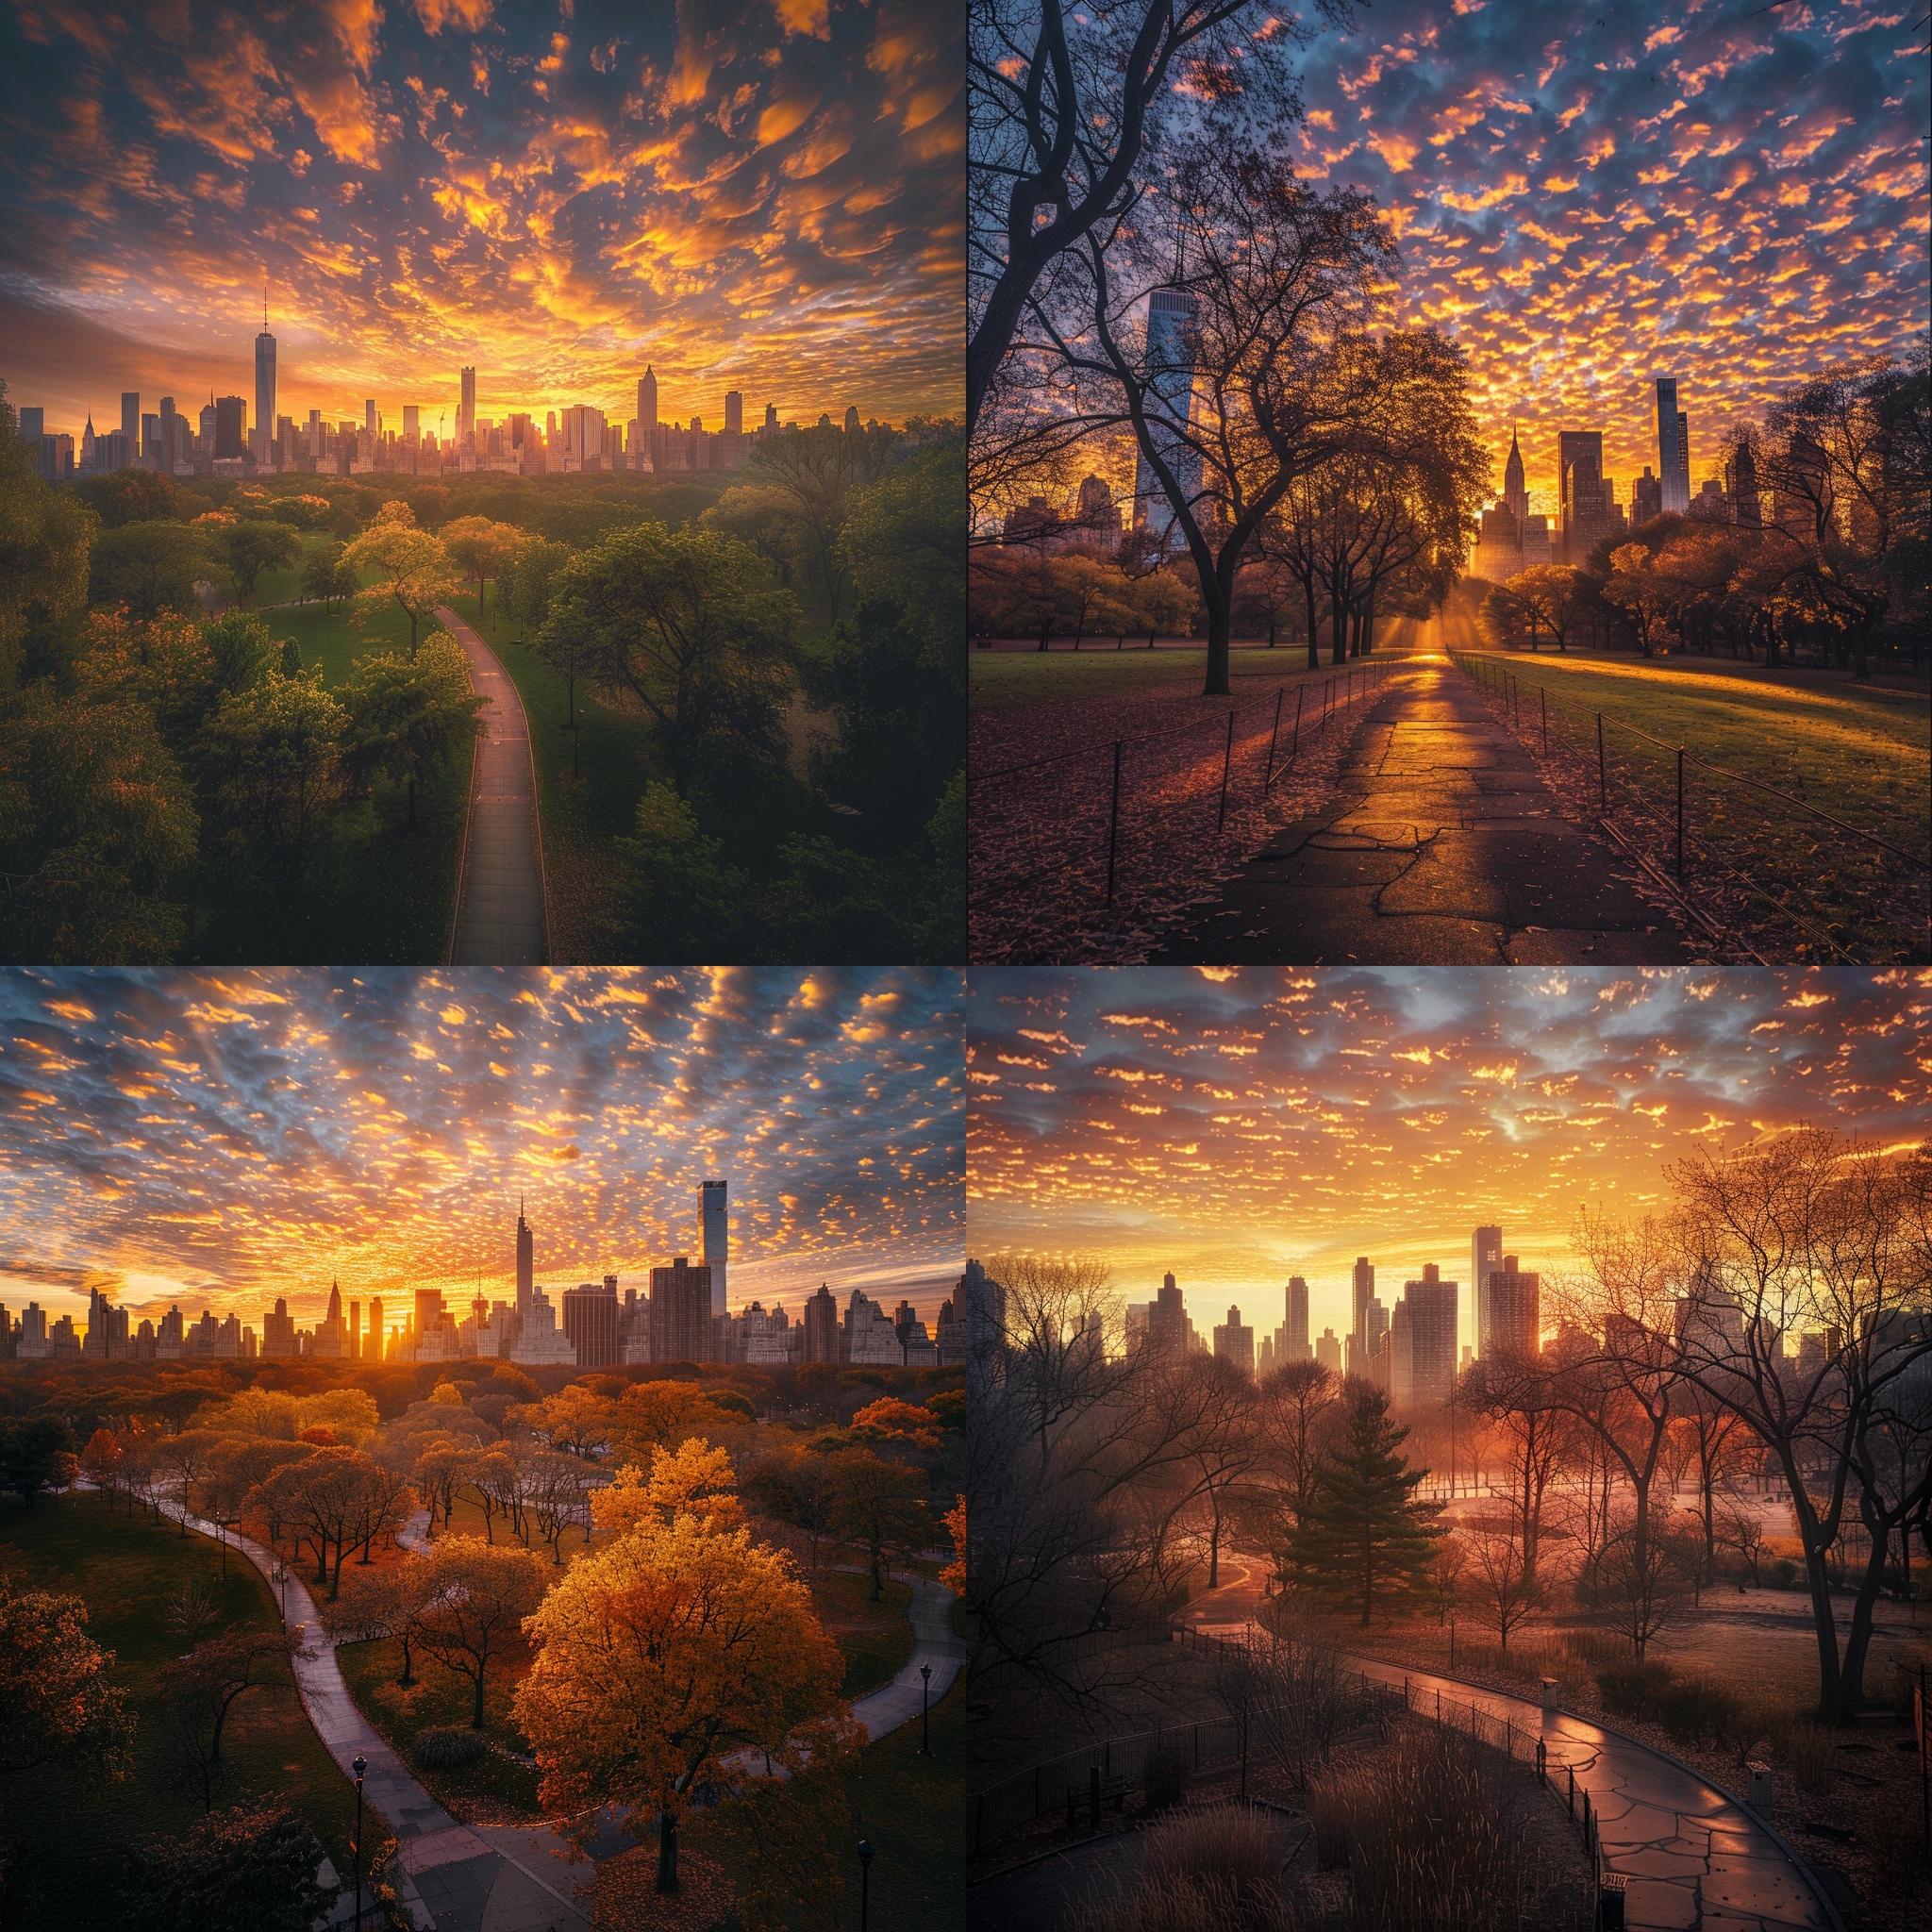 A vibrant sunrise over Central Park, New York, with a 35mm angle. The early morning light casts a golden hue on the trees and pathways, with distant skyscrapers silhouetted against the glowing sky. Created Using: 35mm photography, urban nature blend, golden hour lighting, dynamic range, detailed textures, naturalistic colors, depth of field, cityscape background 